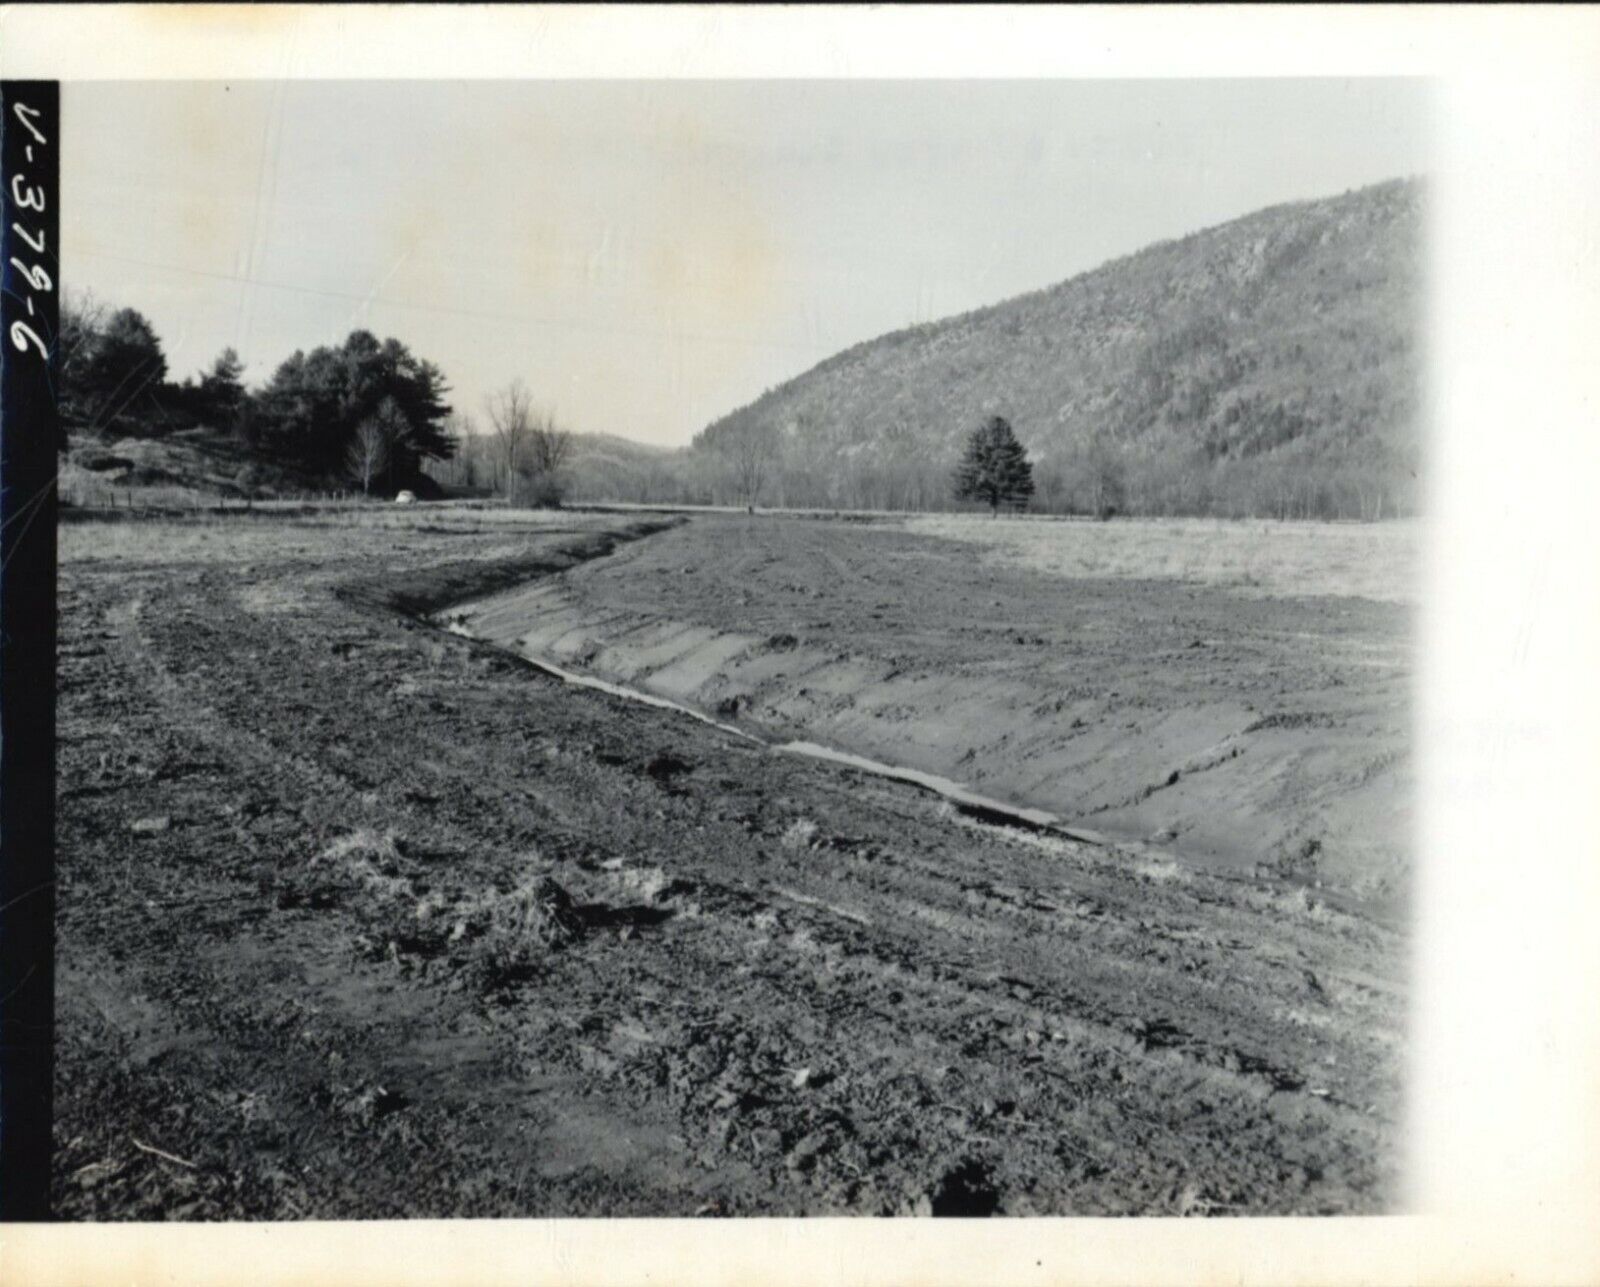 OPEN DRAINAGE DITCH - Rare AGRICULTURAL PHOTOGRAPH - 1962 Weathersfield, VERMONT